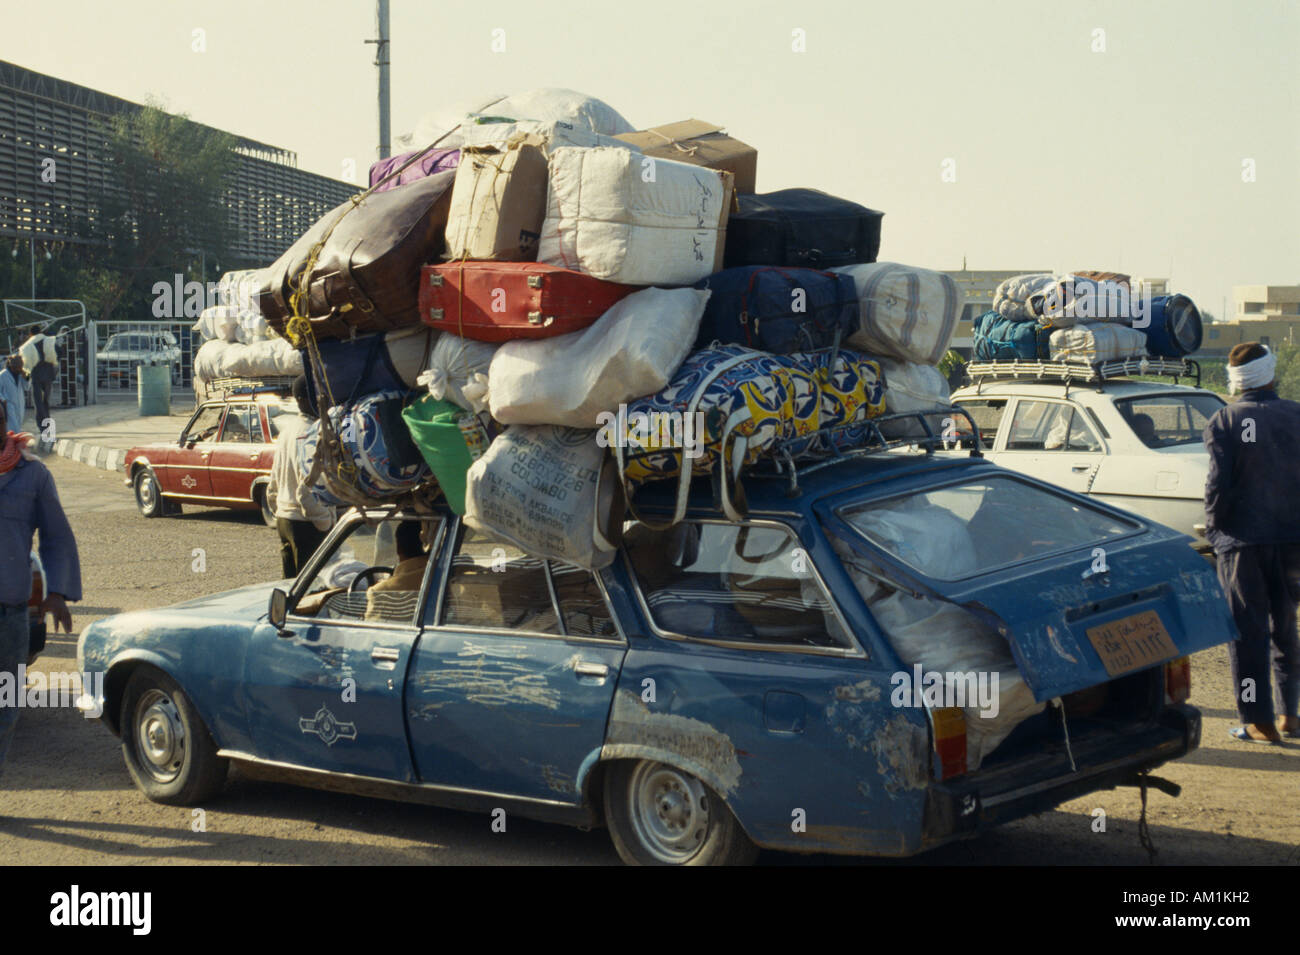 Africa Burkina Faso Ouagadougou View Of Overloaded African Car Carrying  Luggage On Roof High-Res Stock Photo - Getty Images